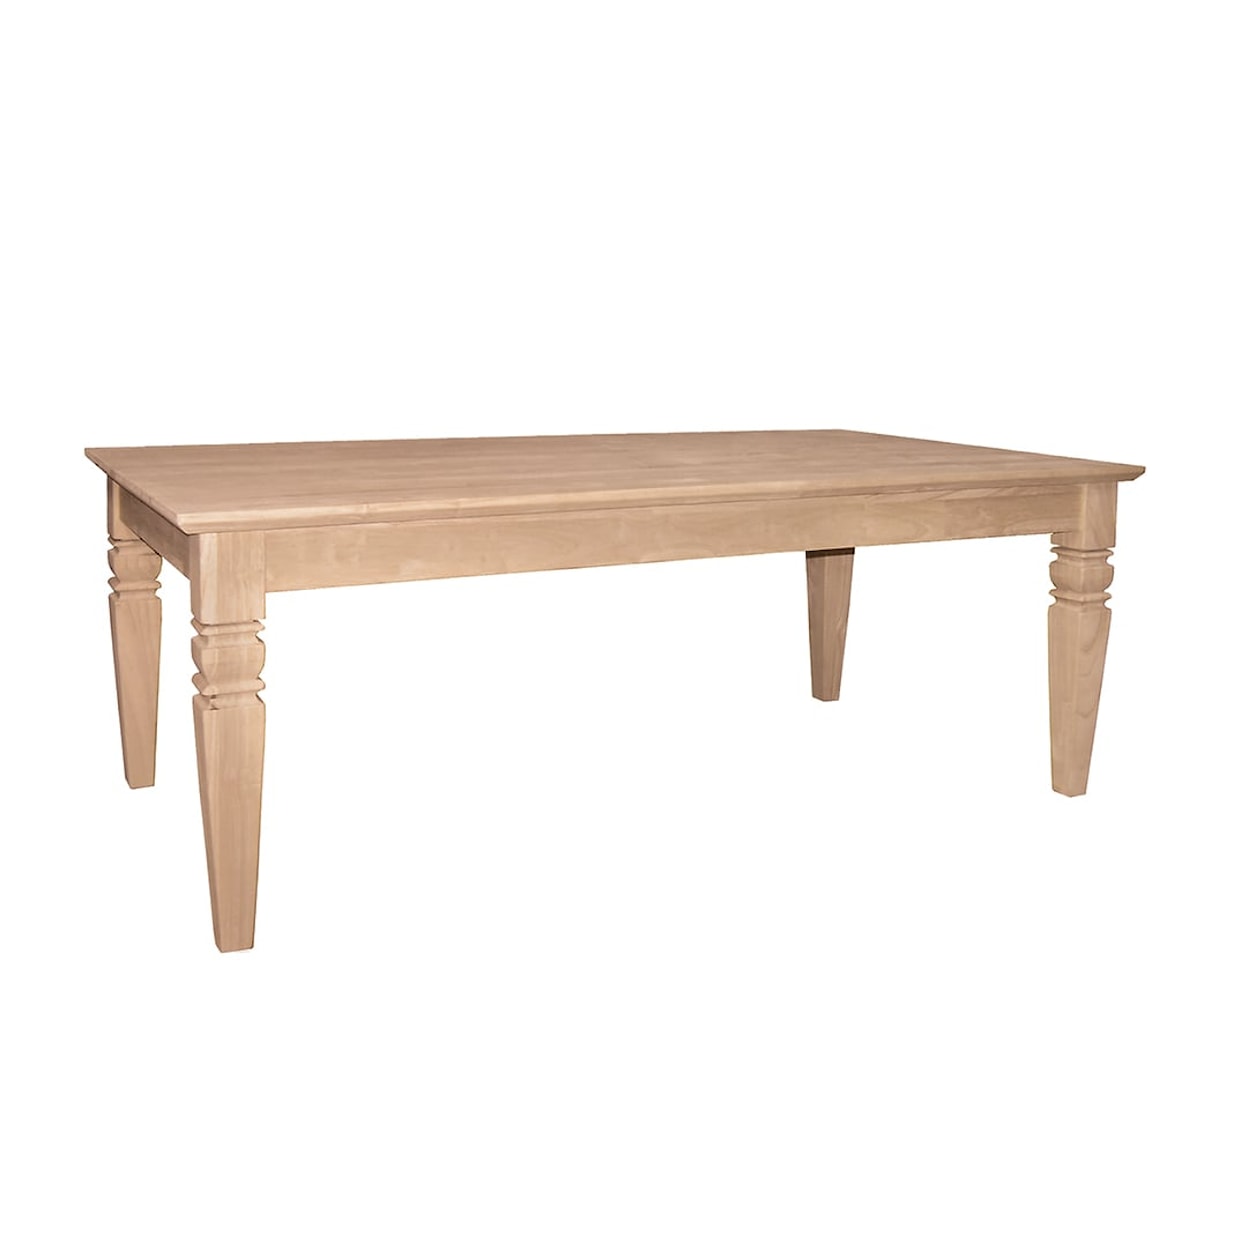 John Thomas SELECT Occasional & Accents Solano Coffee Table